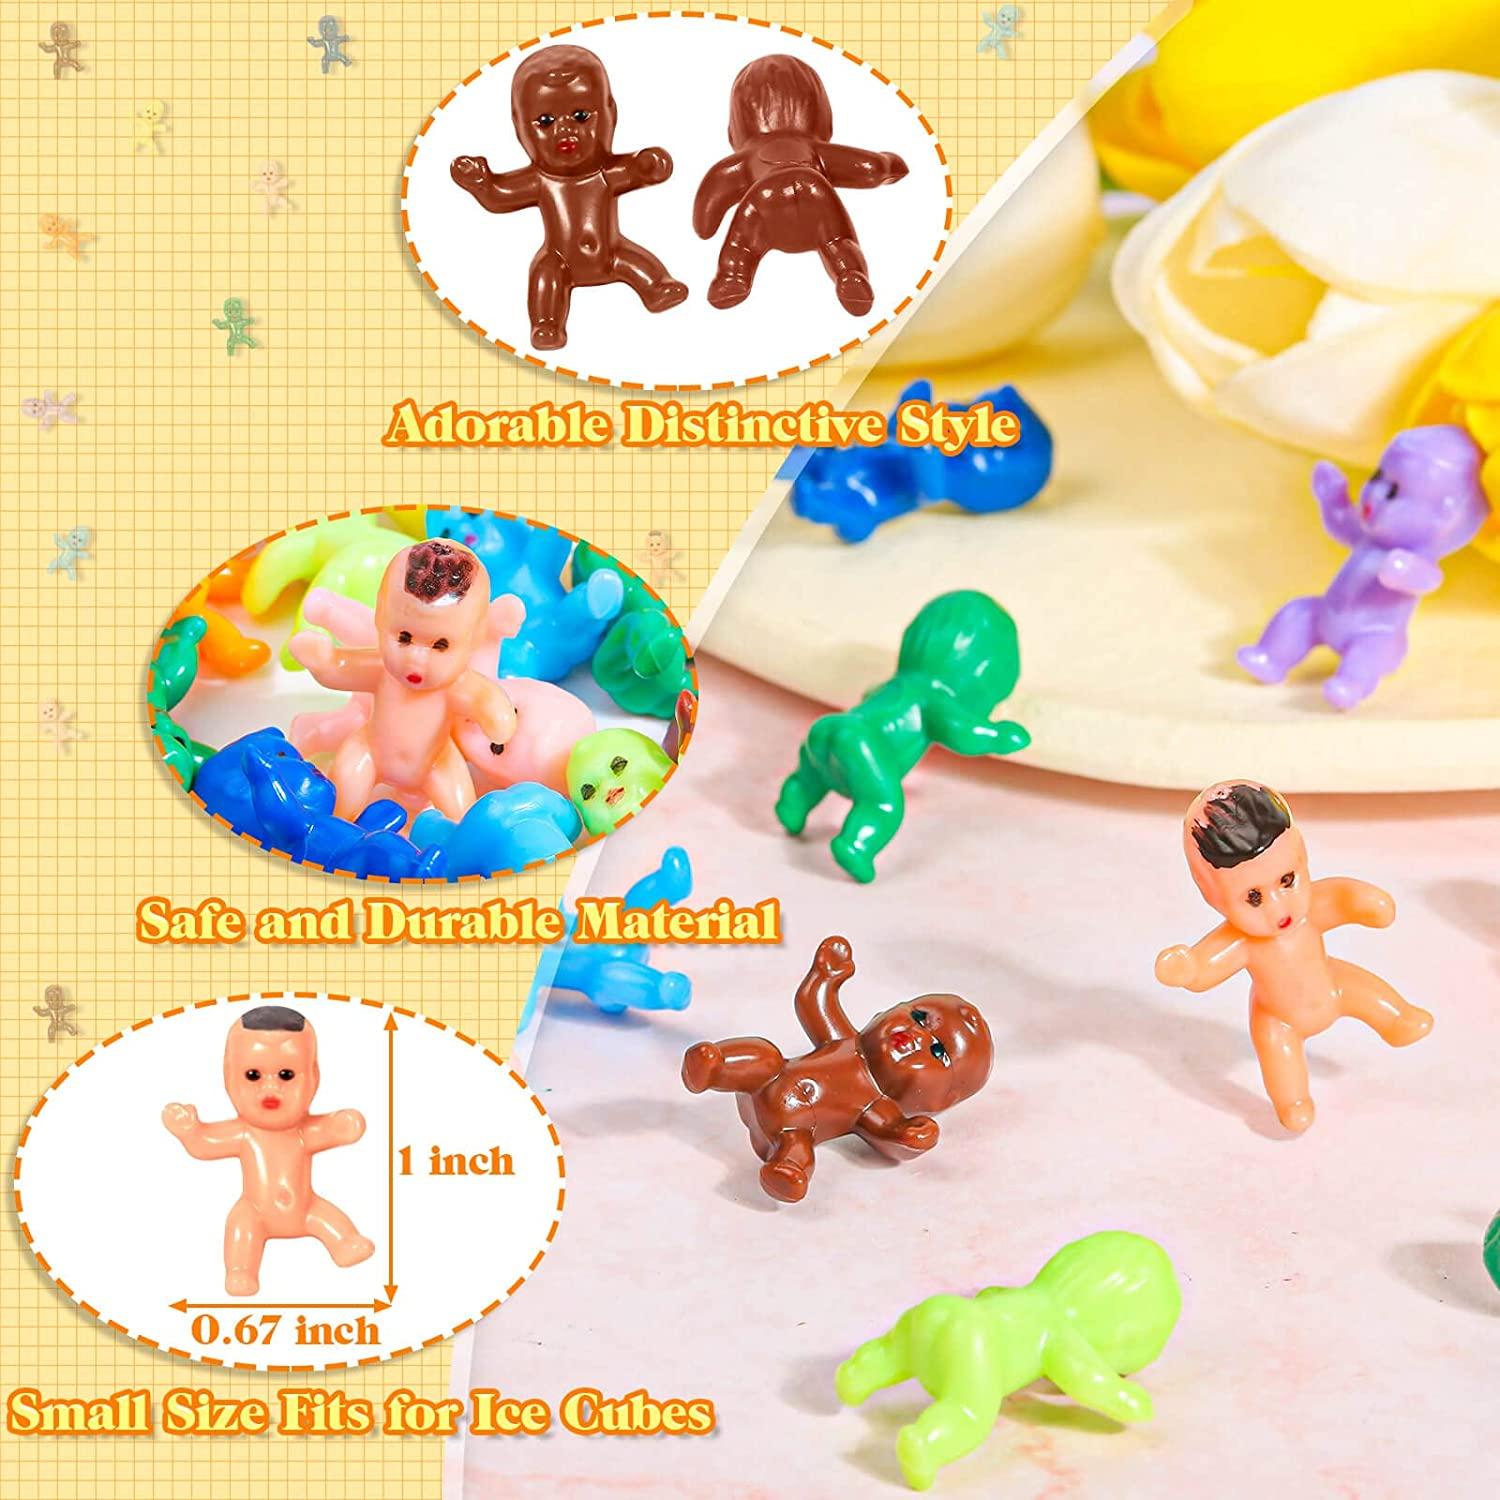  selizo Mini Plastic Babies for Baby Shower, 300pcs Tiny Baby  Figurines Mini Babies Bulk for Ice Cube Babies, Small King Cake Babies, My  Water Broke Baby Shower Games (6 Colors) 